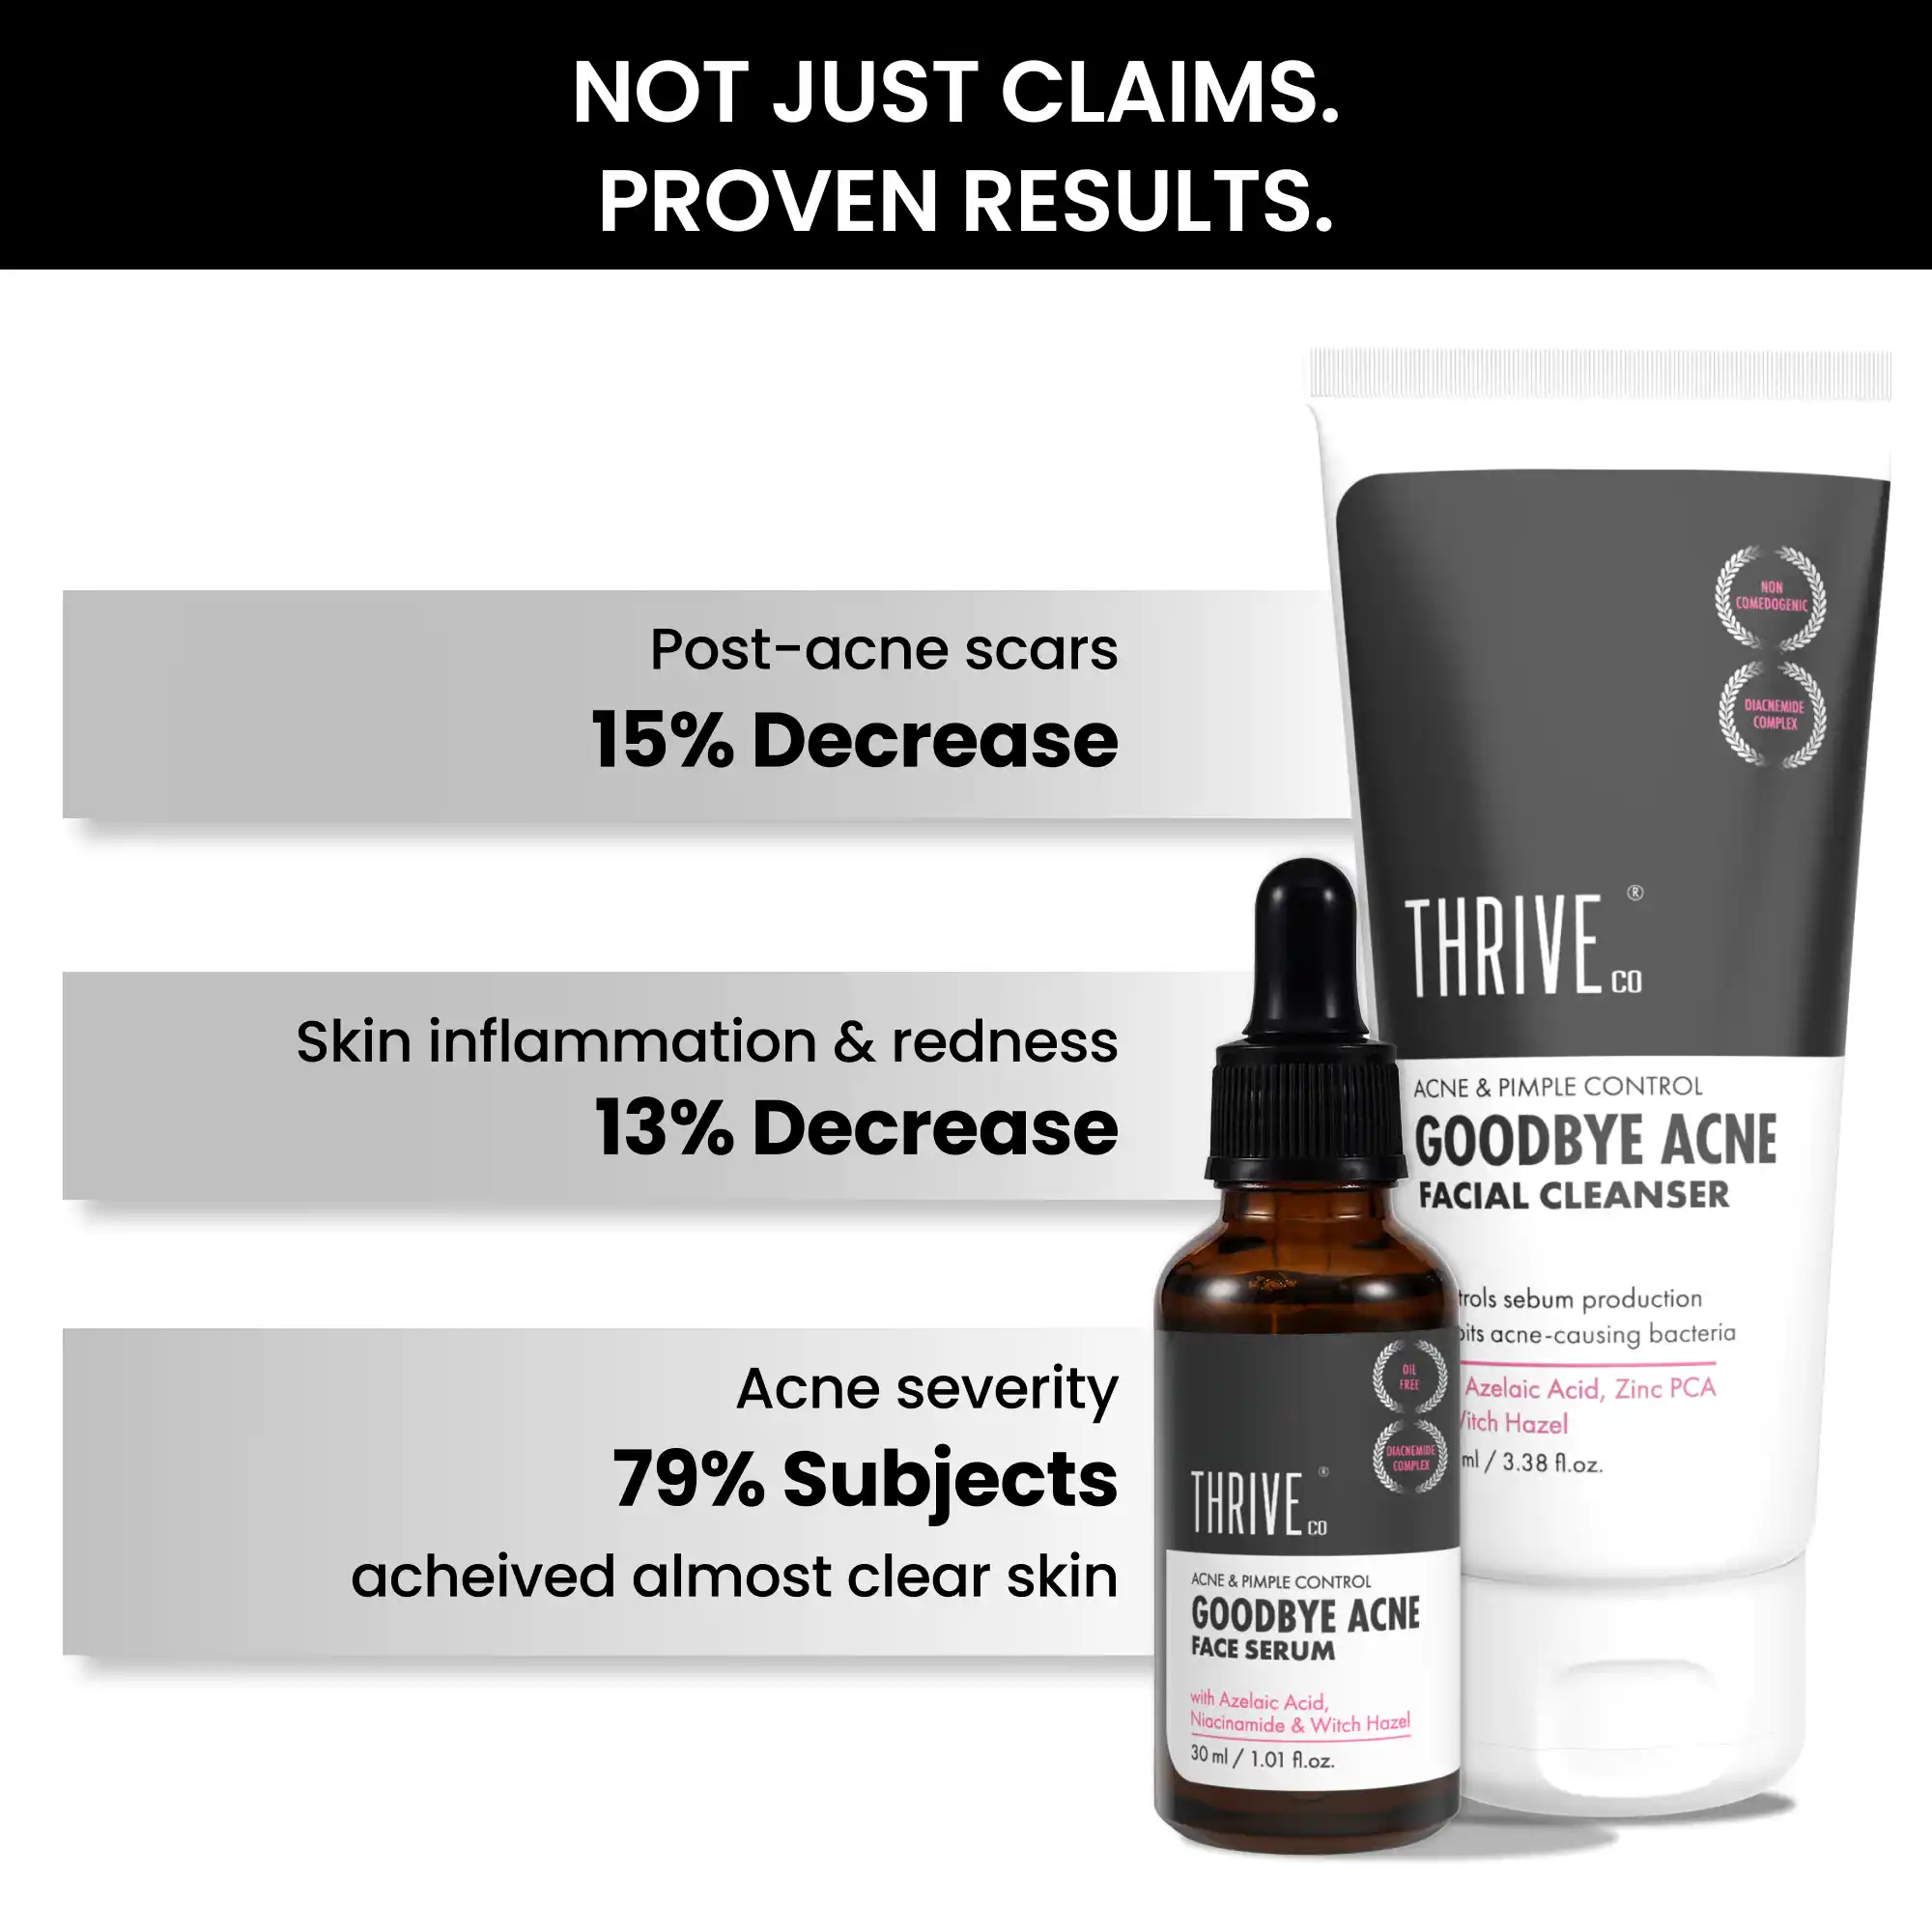 Not just claims, ThriveCo Goodbye Acne Kit for men also gives proven results